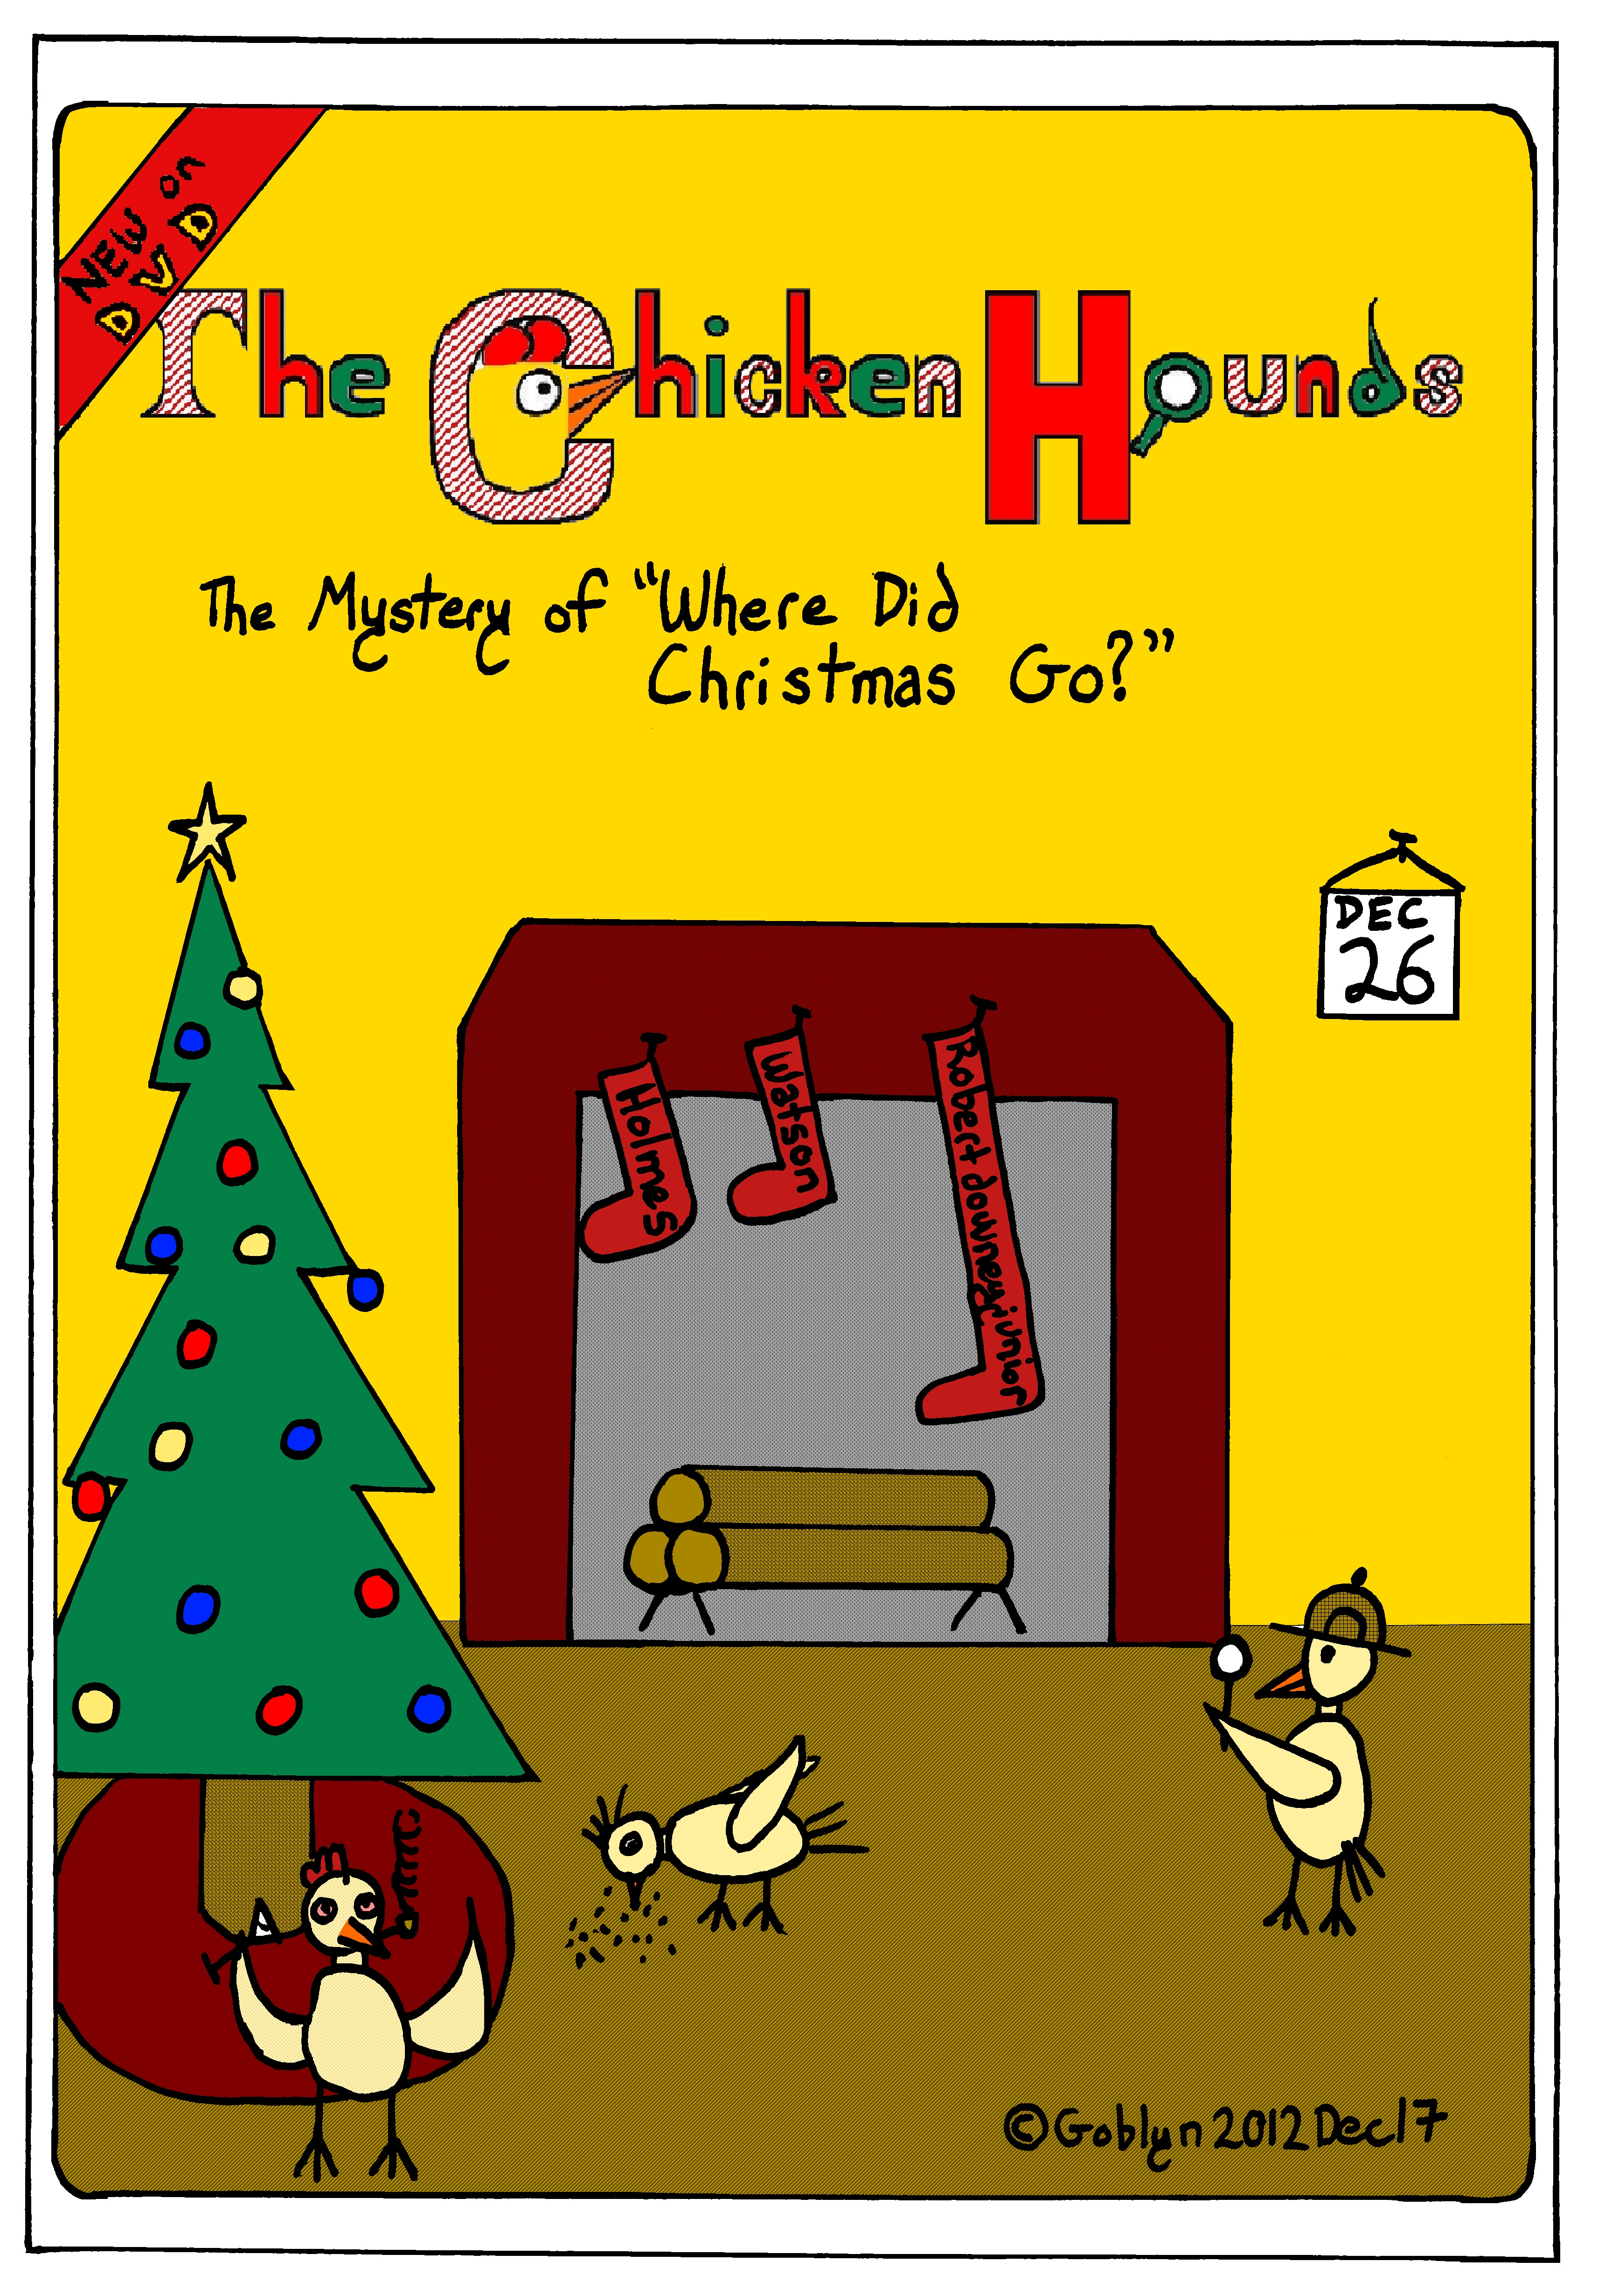 The Chicken Hounds, San Francisco's Greatest Detectives in the Mystery of "Where Did Christmas Go?"